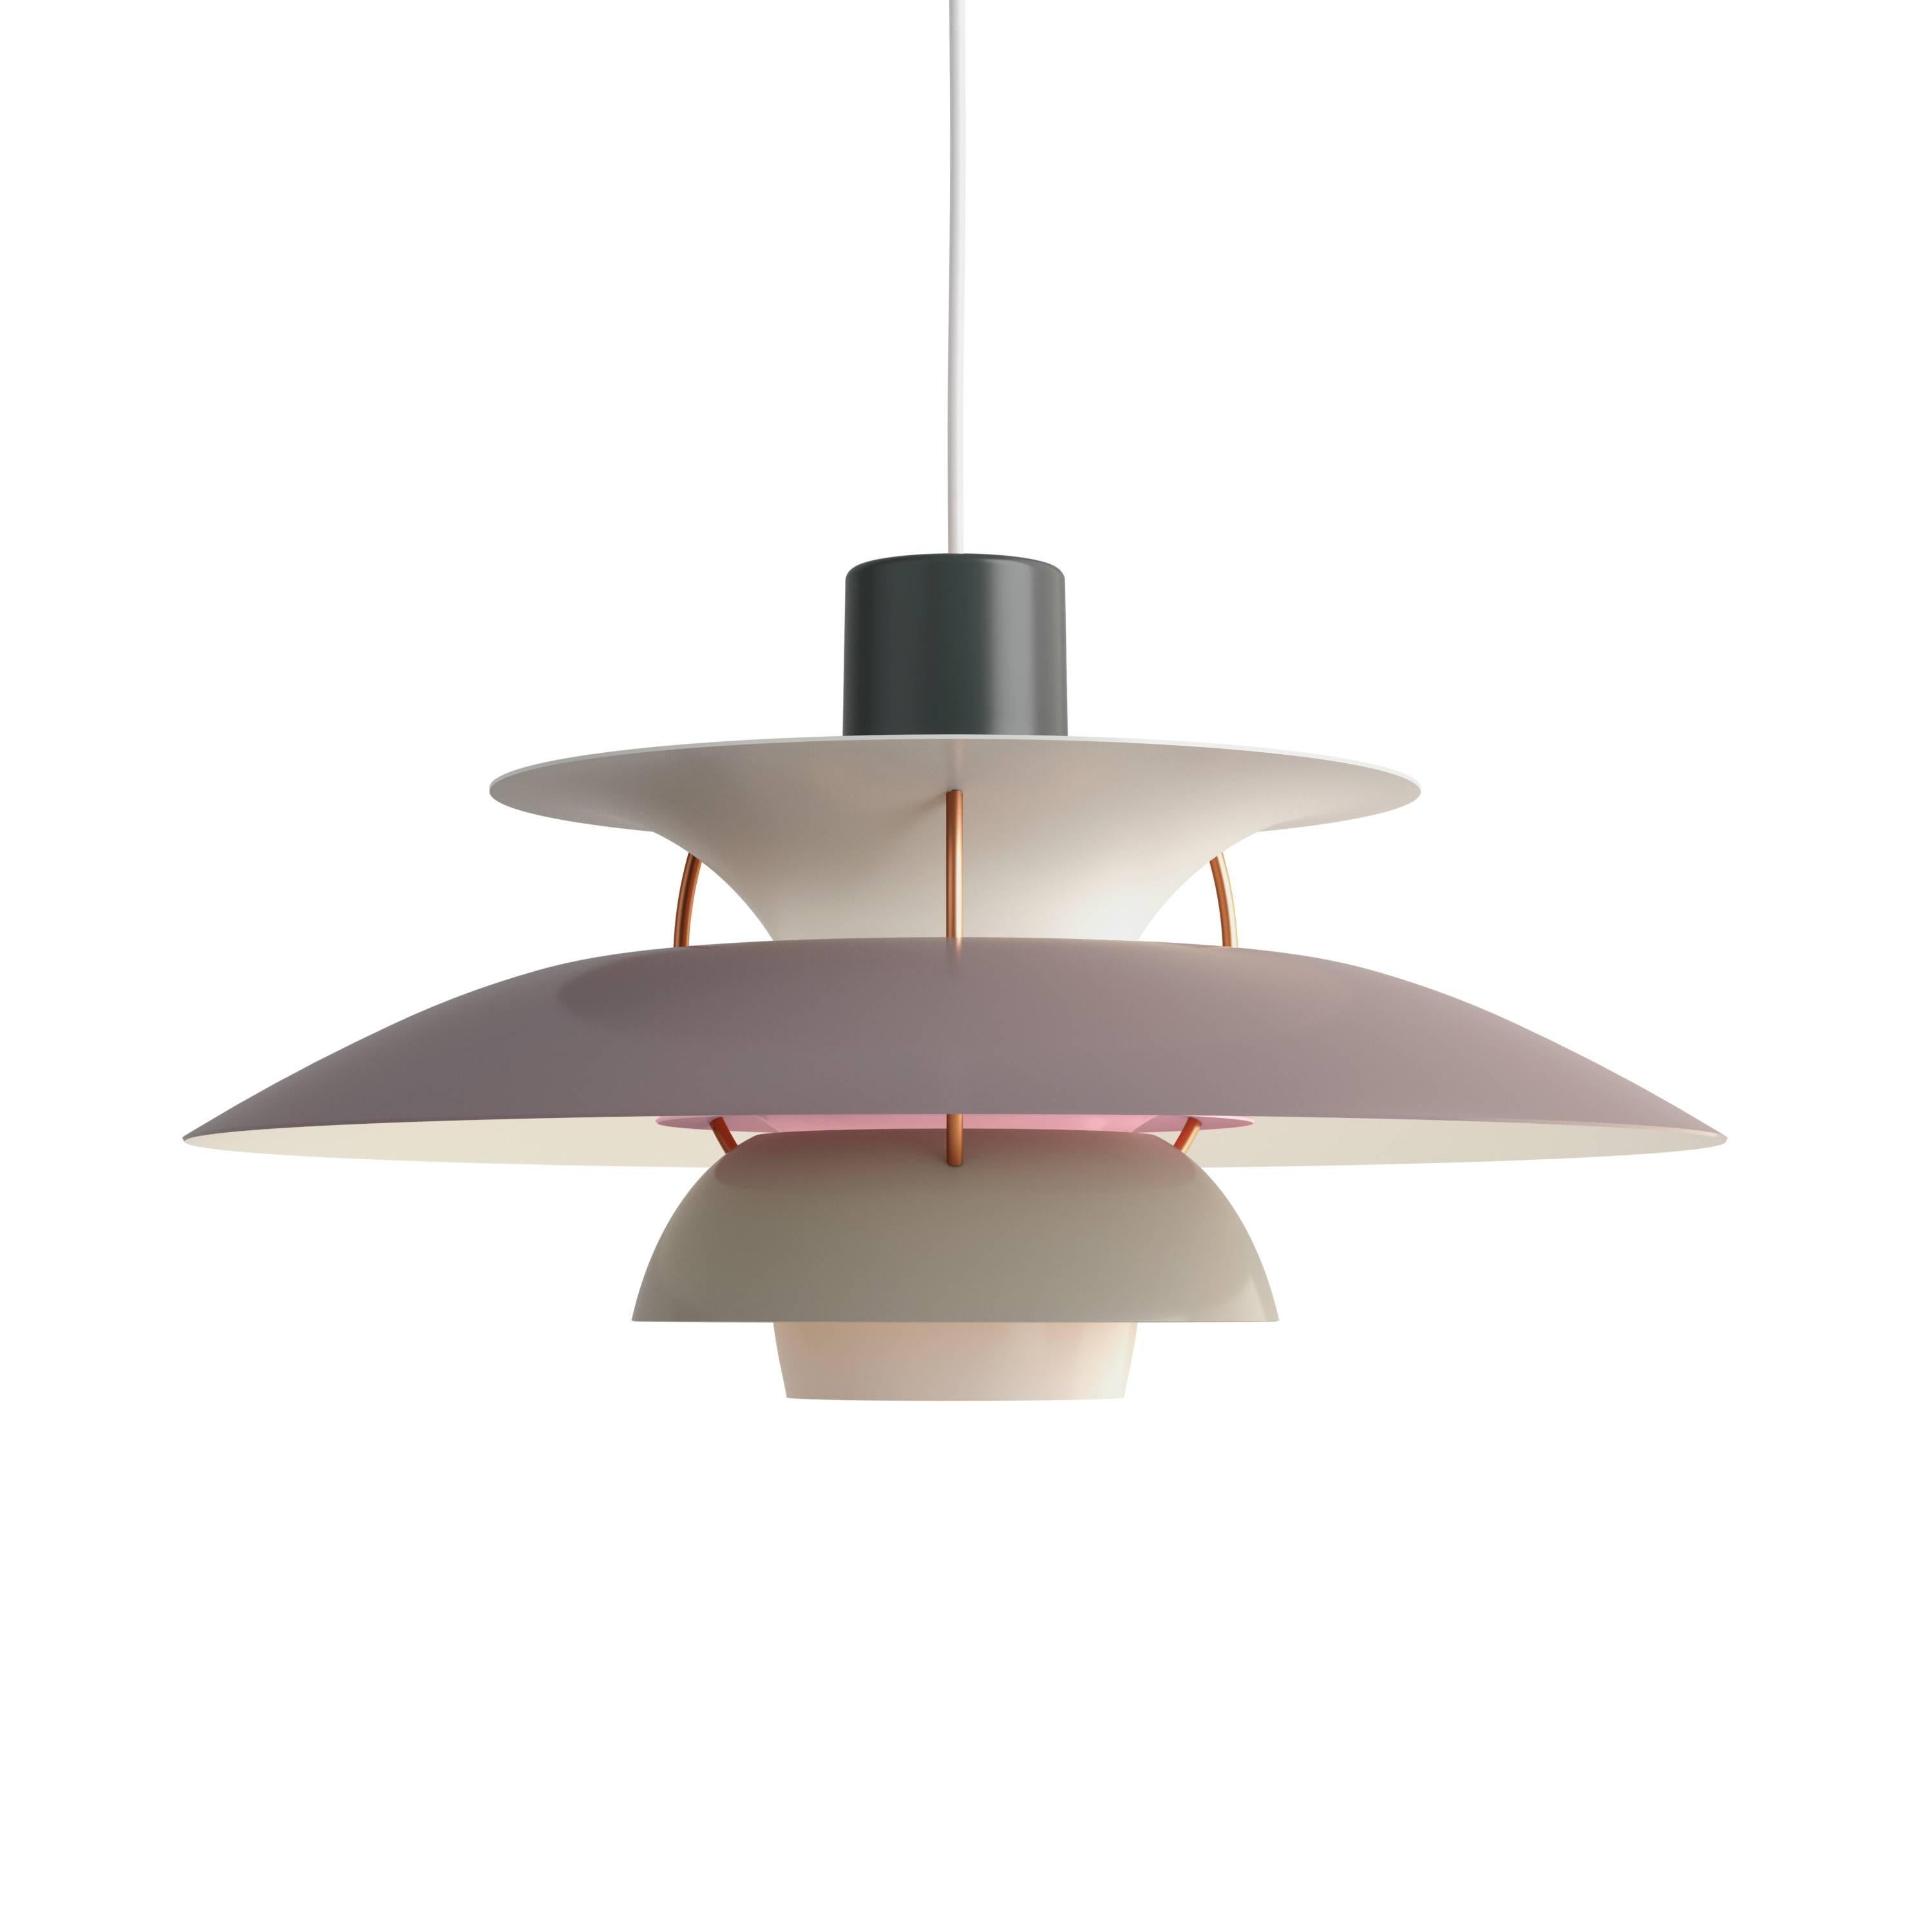 Poul Henningsen PH 5 Pendant for Louis Poulsen in Classic White In New Condition For Sale In Glendale, CA